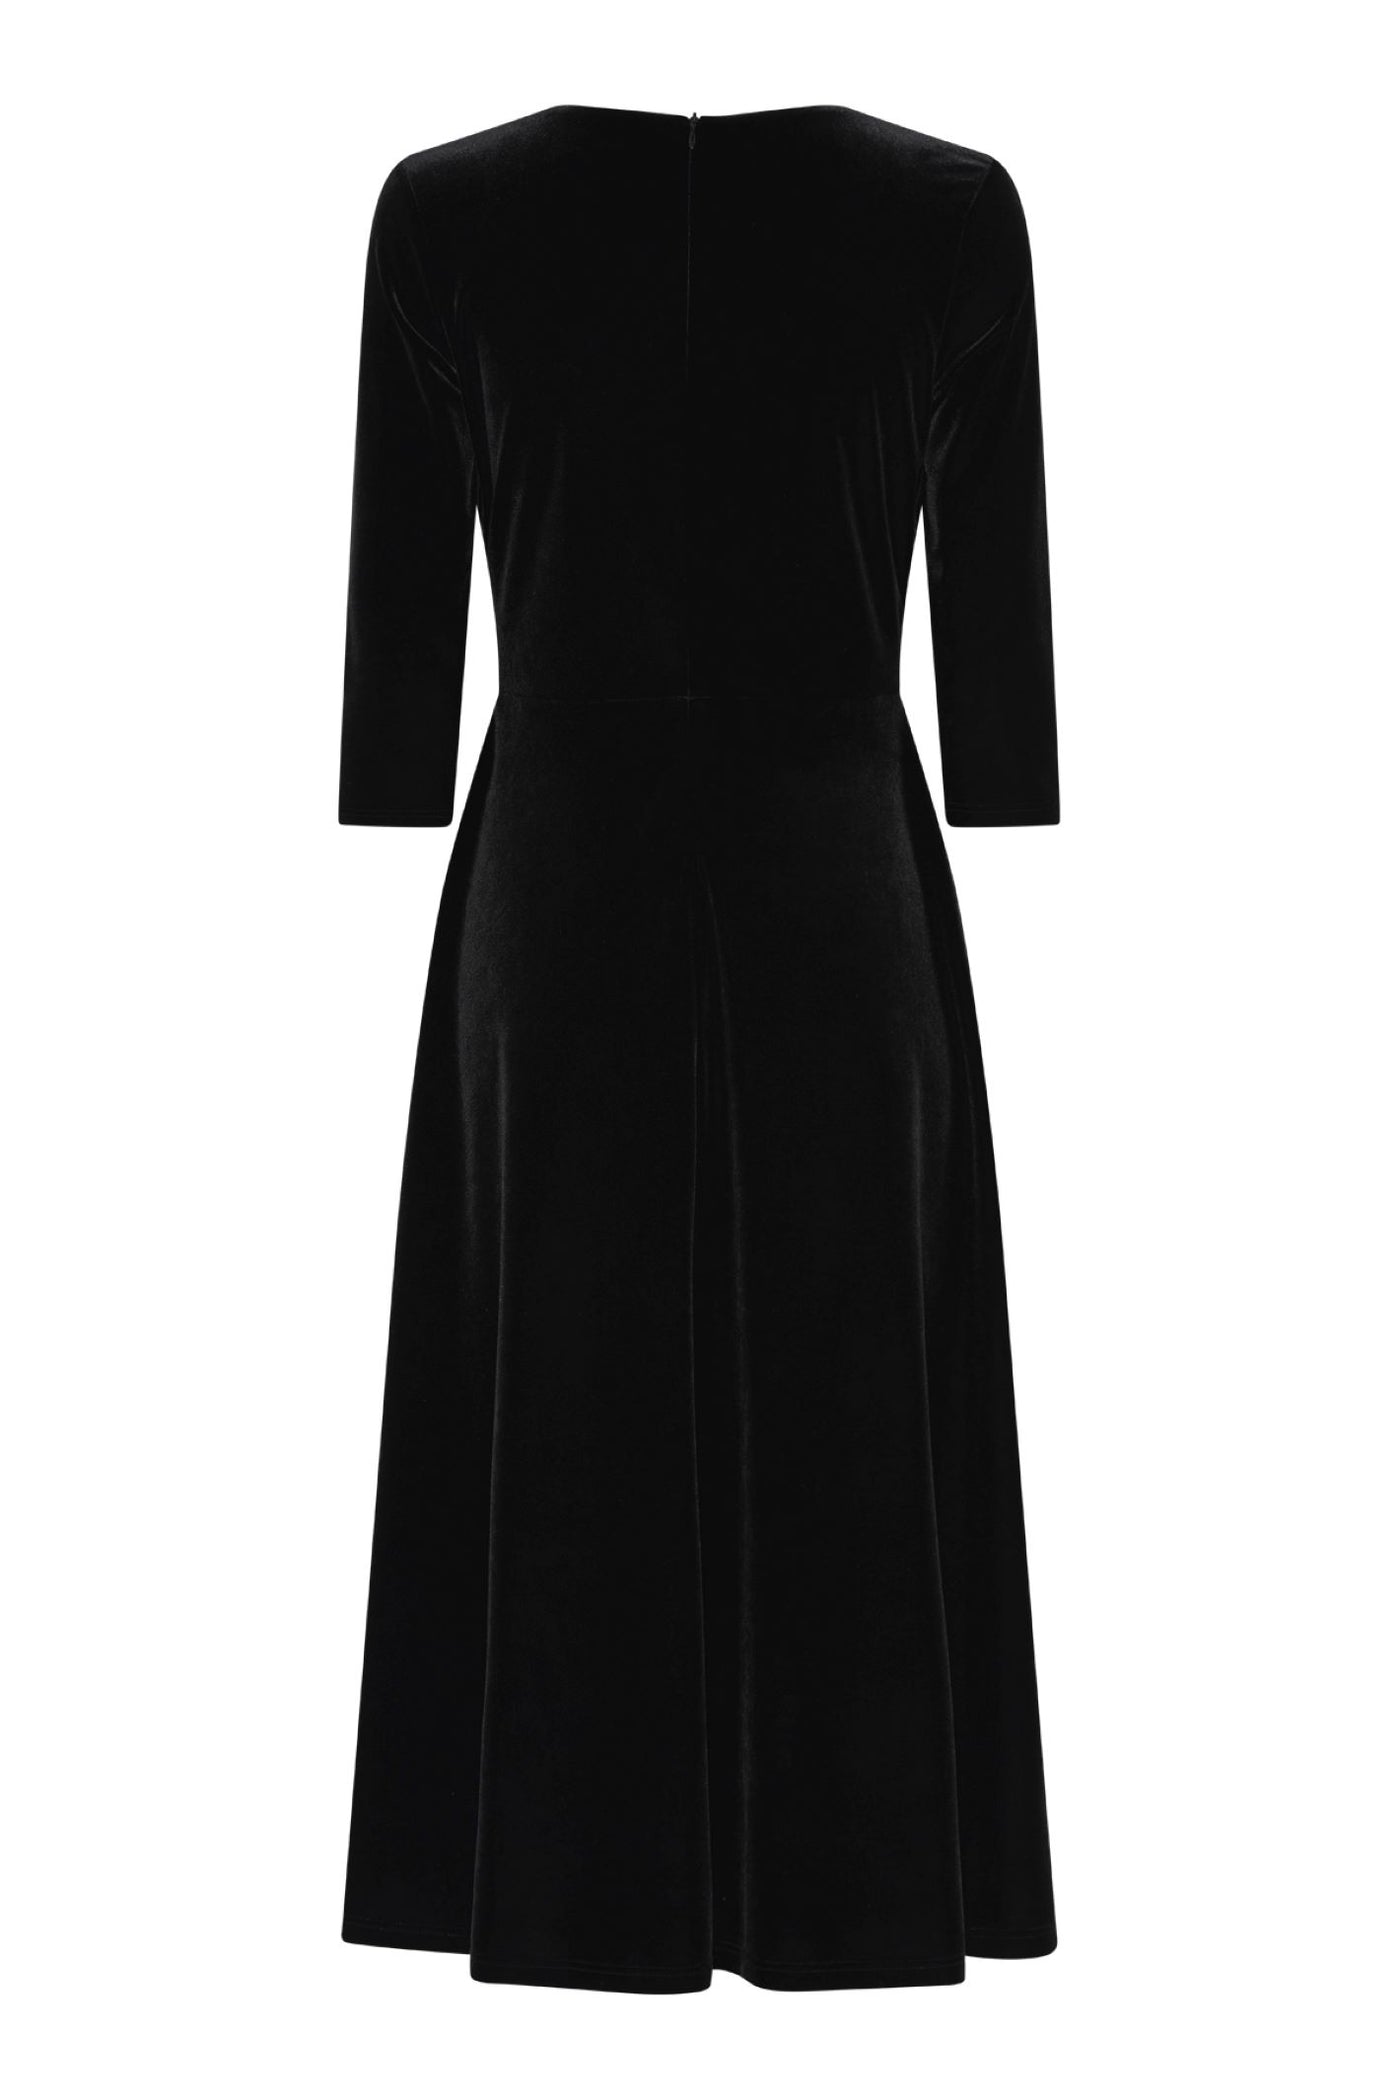 Tia 78732Black Velvet Fit and Flair V Neck Sleeved Evening Dress with Diamante Band